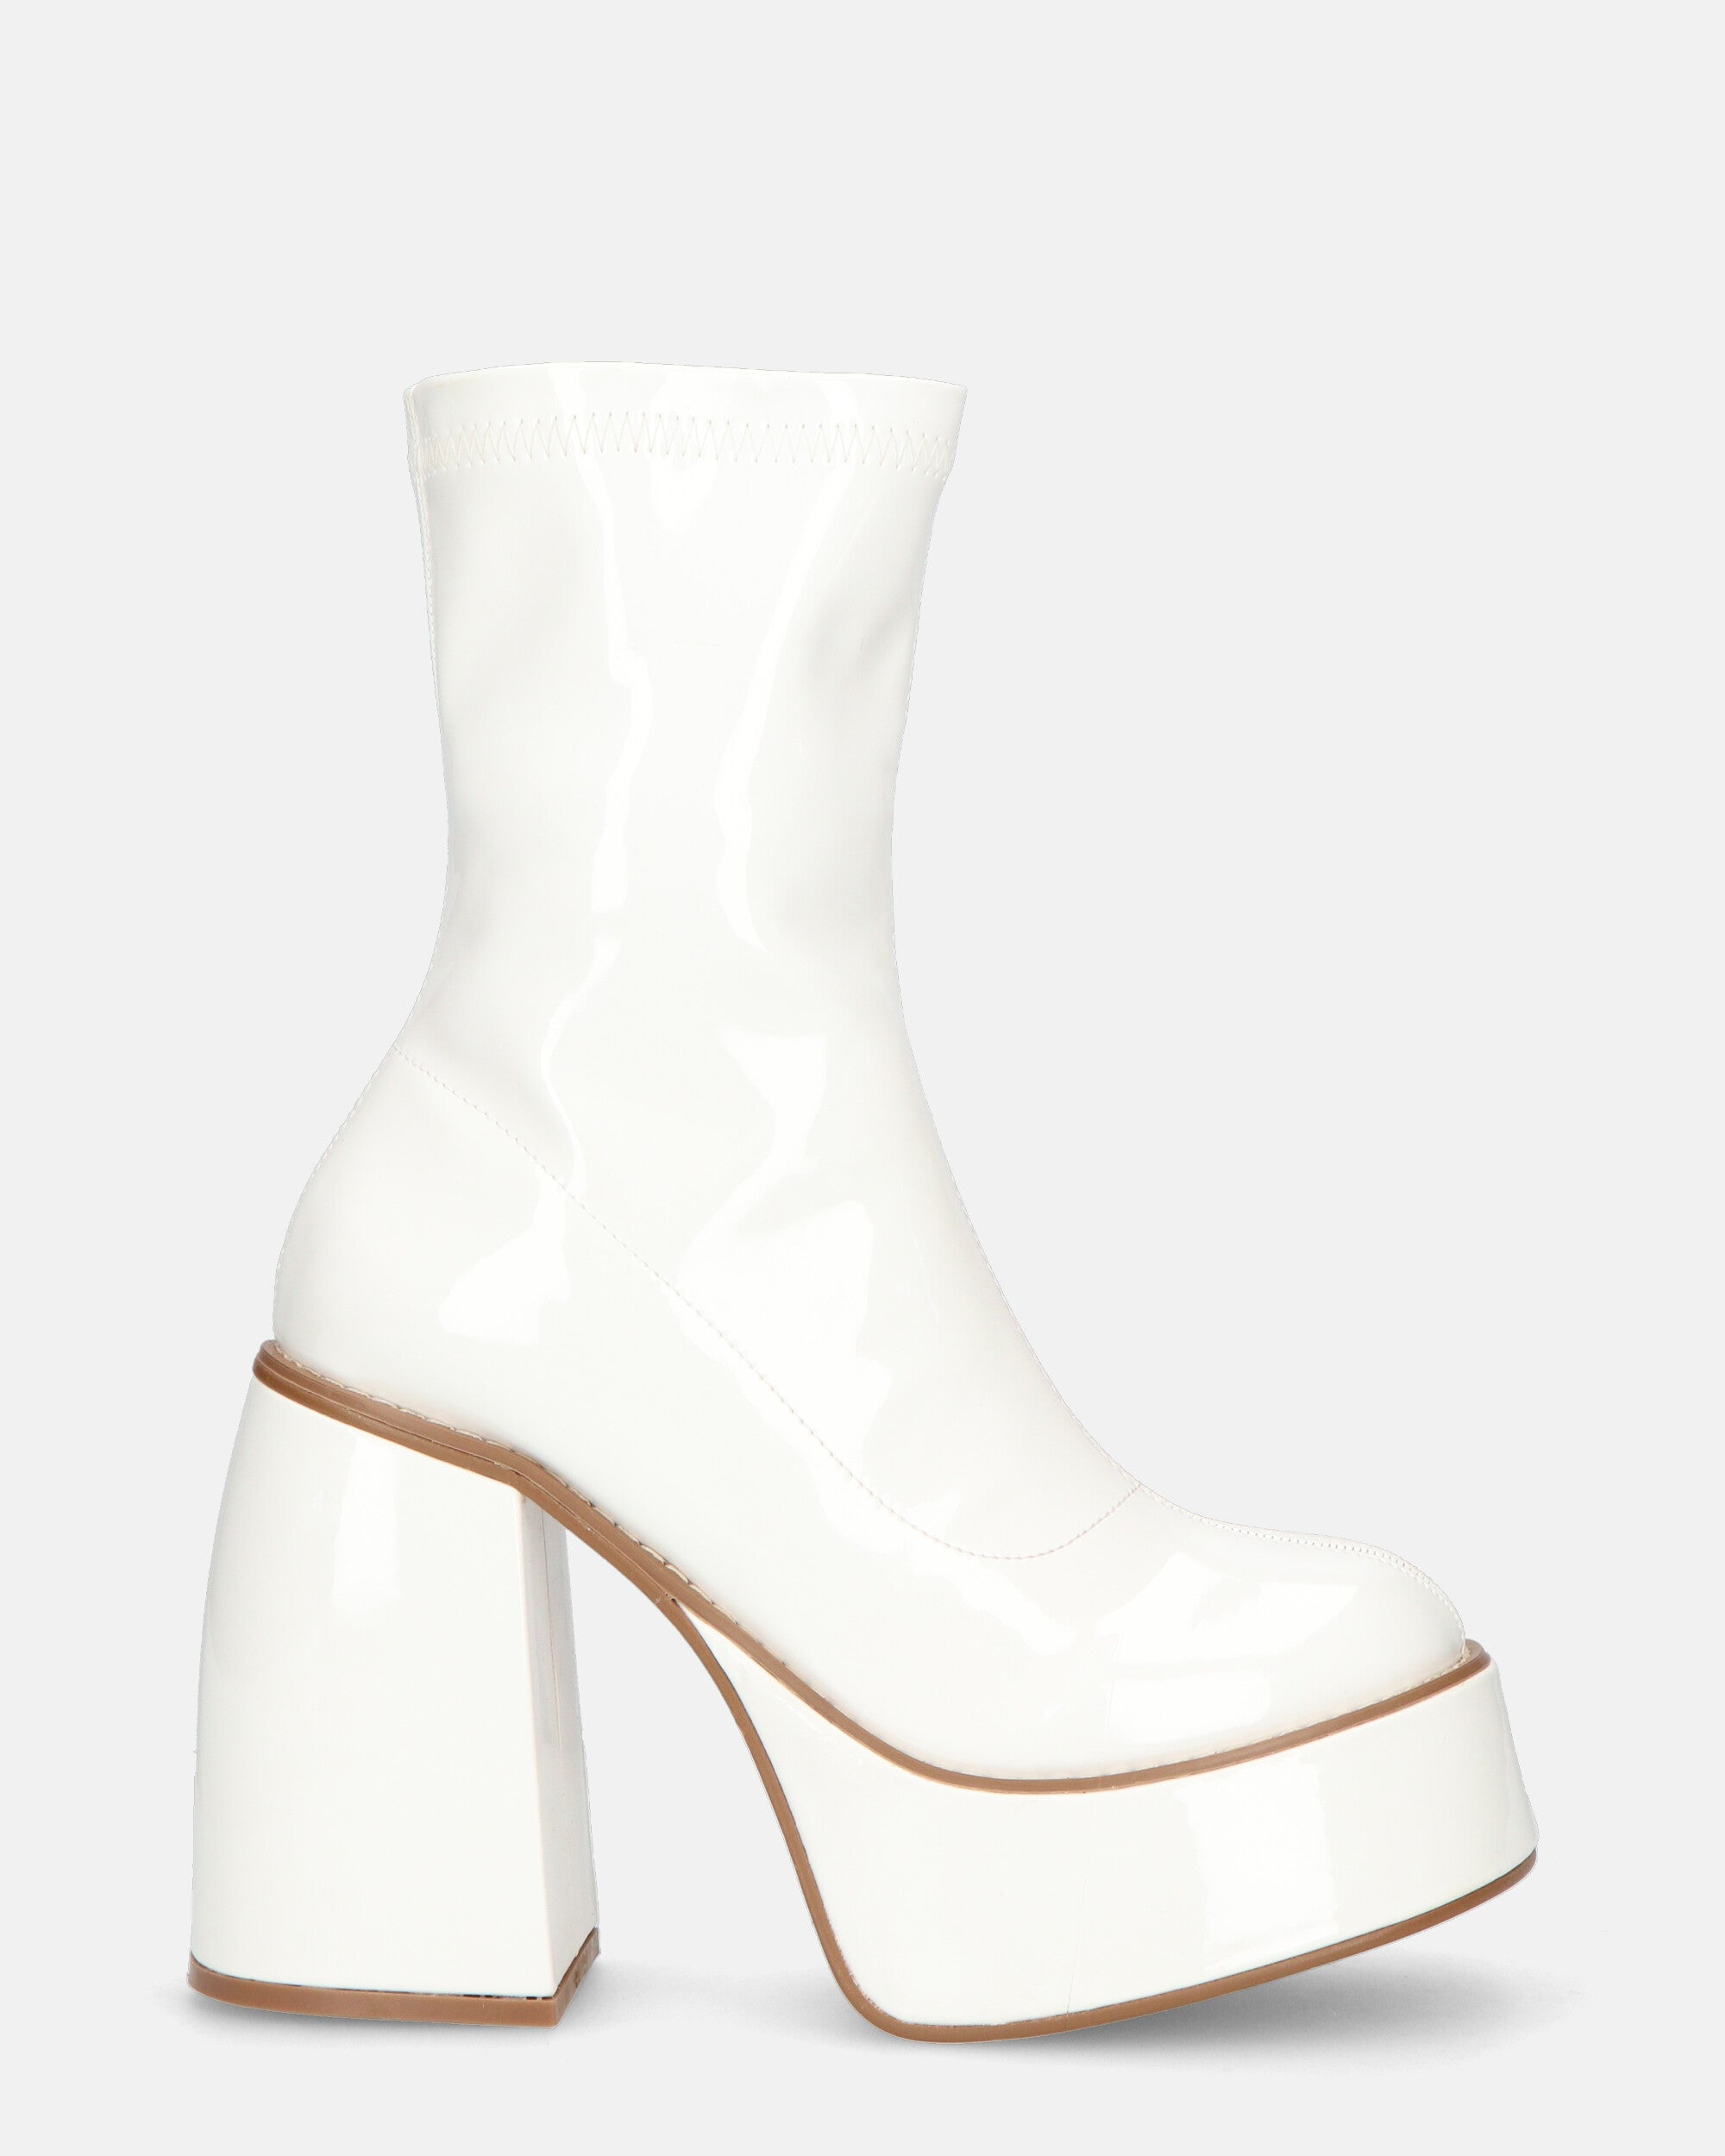 MYA - platform ankle boots with high heels in white glassy